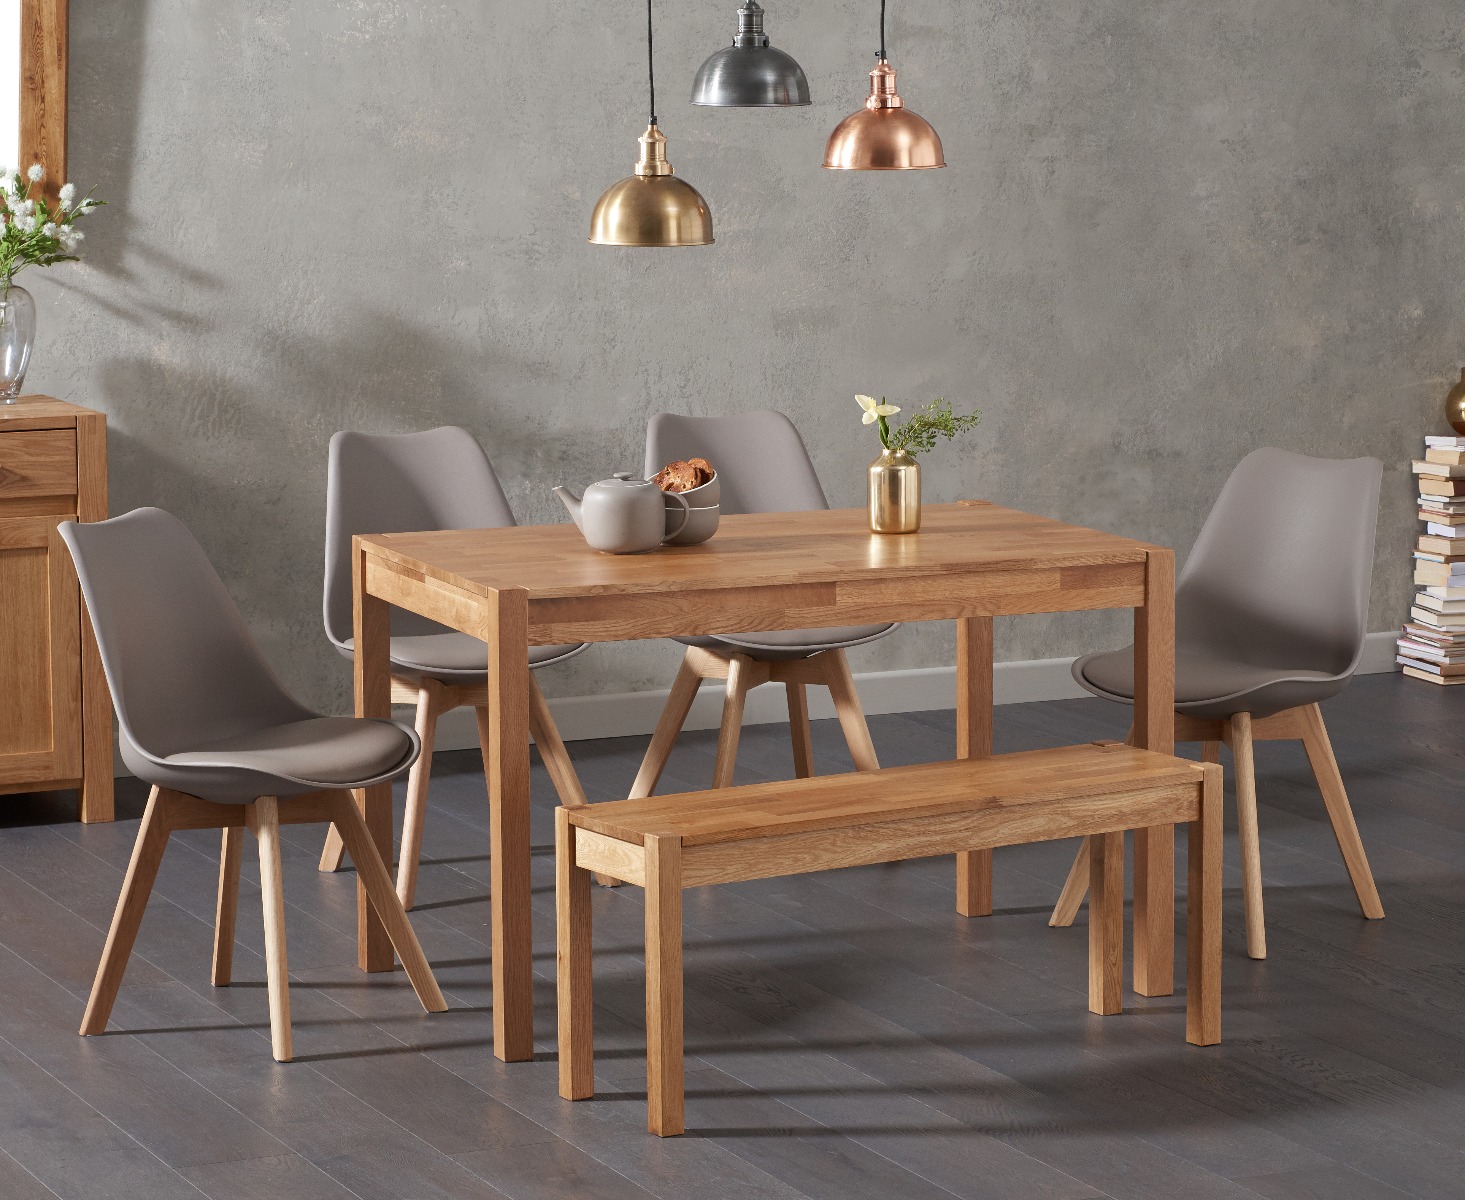 York 150cm Solid Oak Dining Table With 2 White Orson Faux Leather Chairs And 2 York Benches